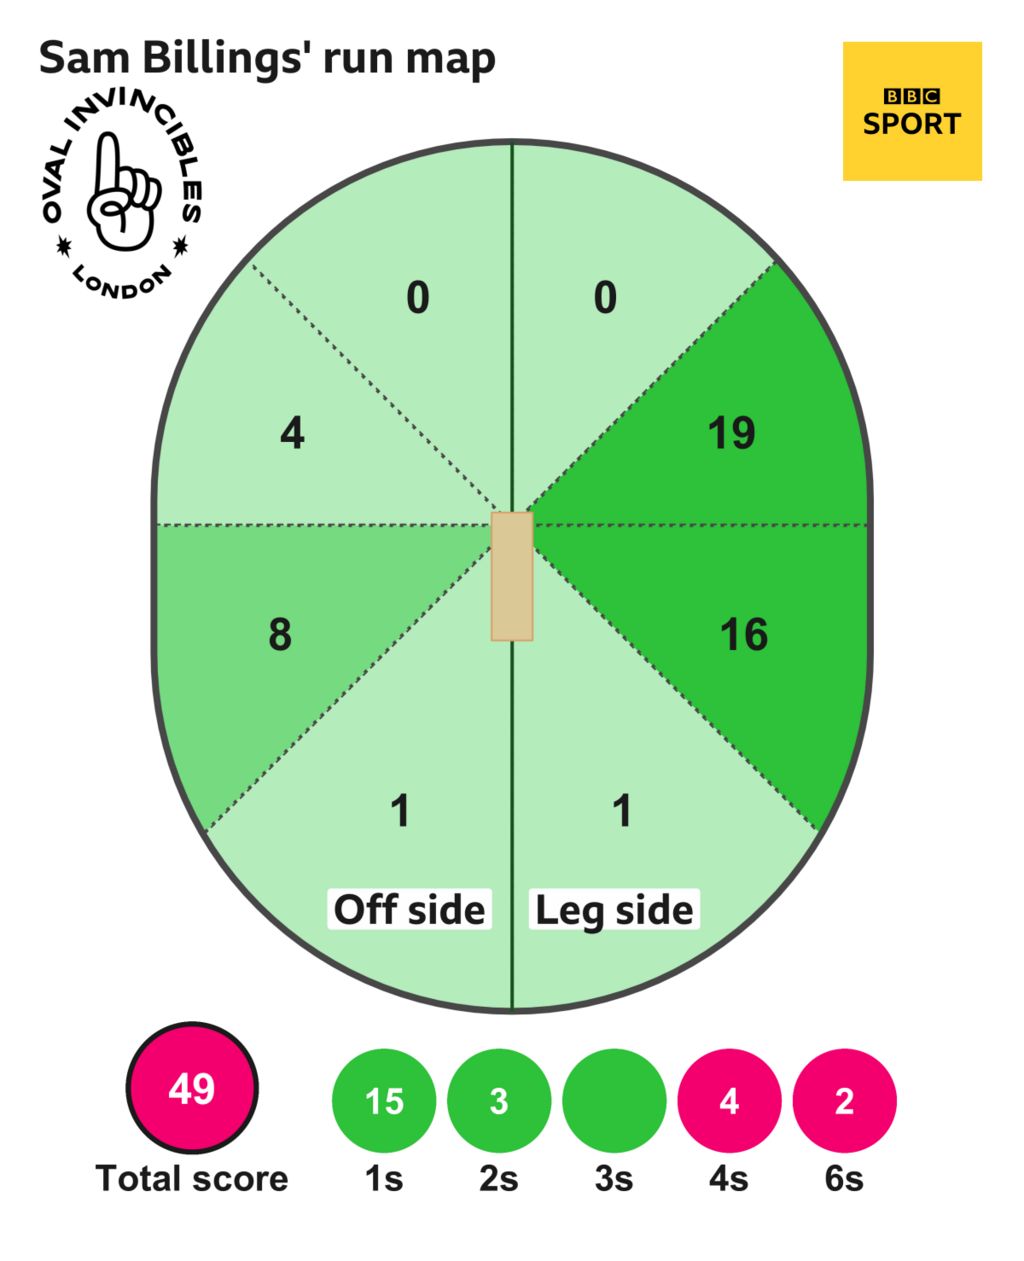 The run map shows Sam Billings scored 49 with 2 sixes, 4 fours, 3 two, and 15 singles for Oval Invincibles Men